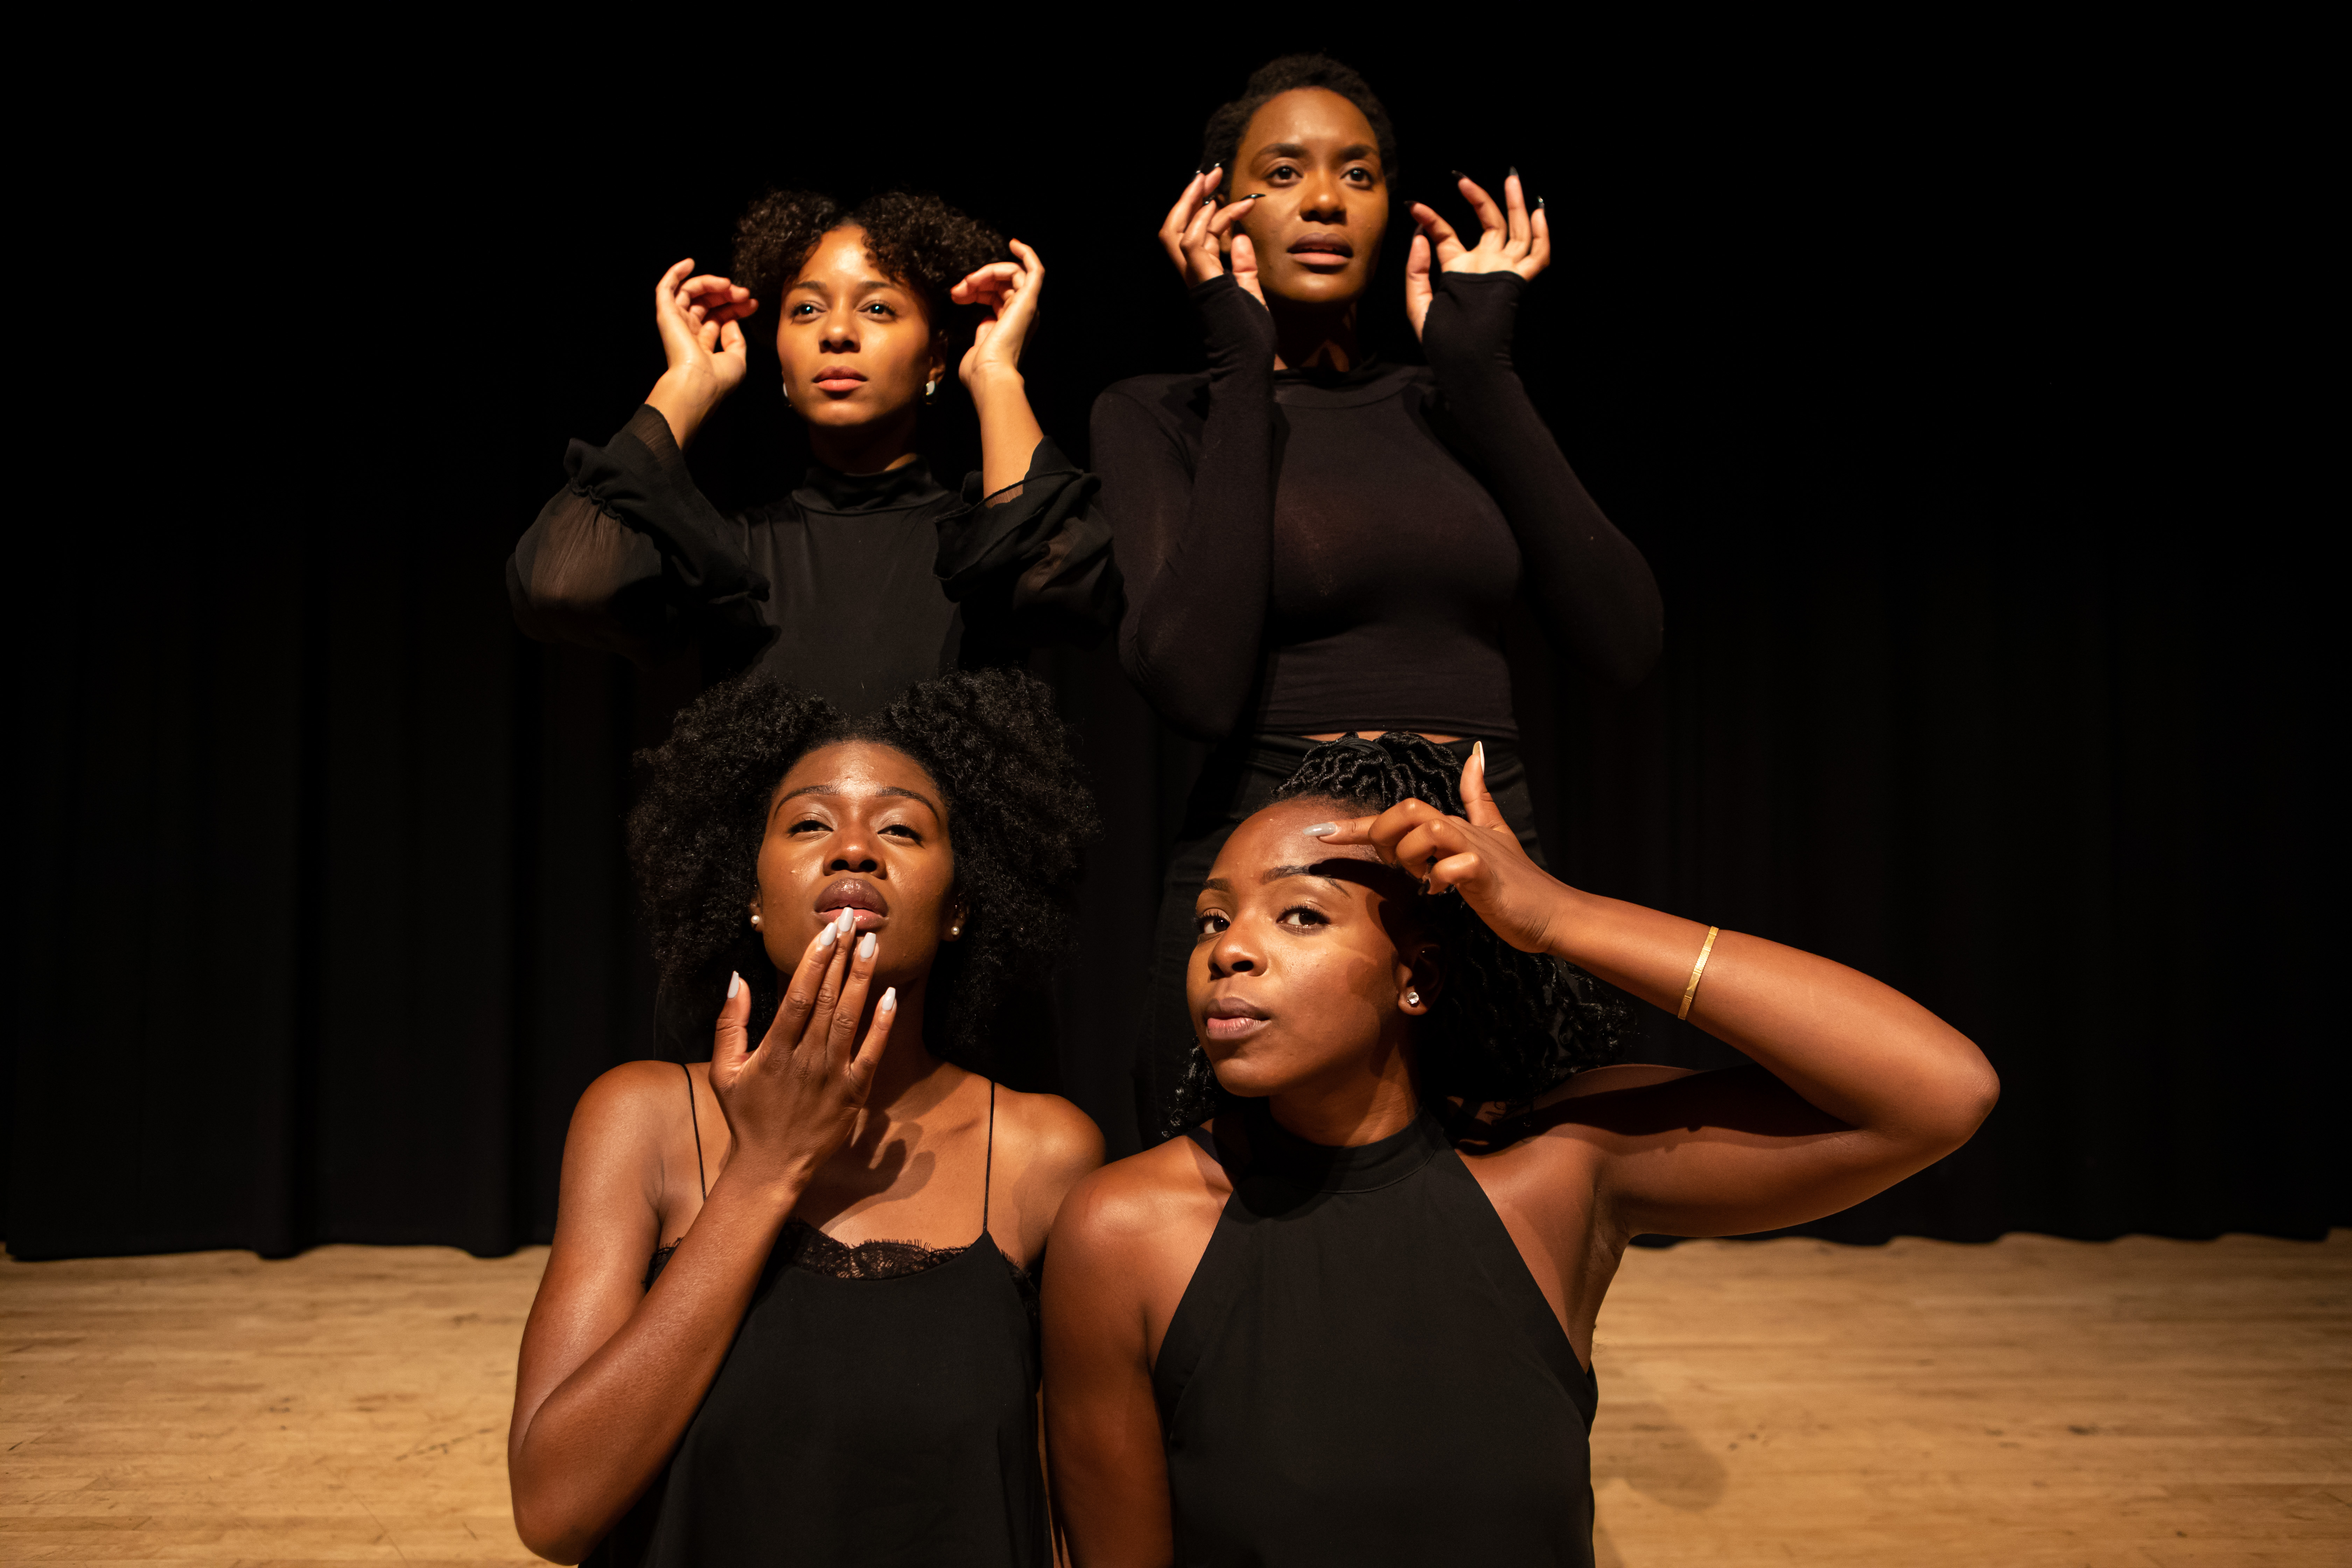 Queens of Sheba: The Play Exploring the Black Female Lived Experience